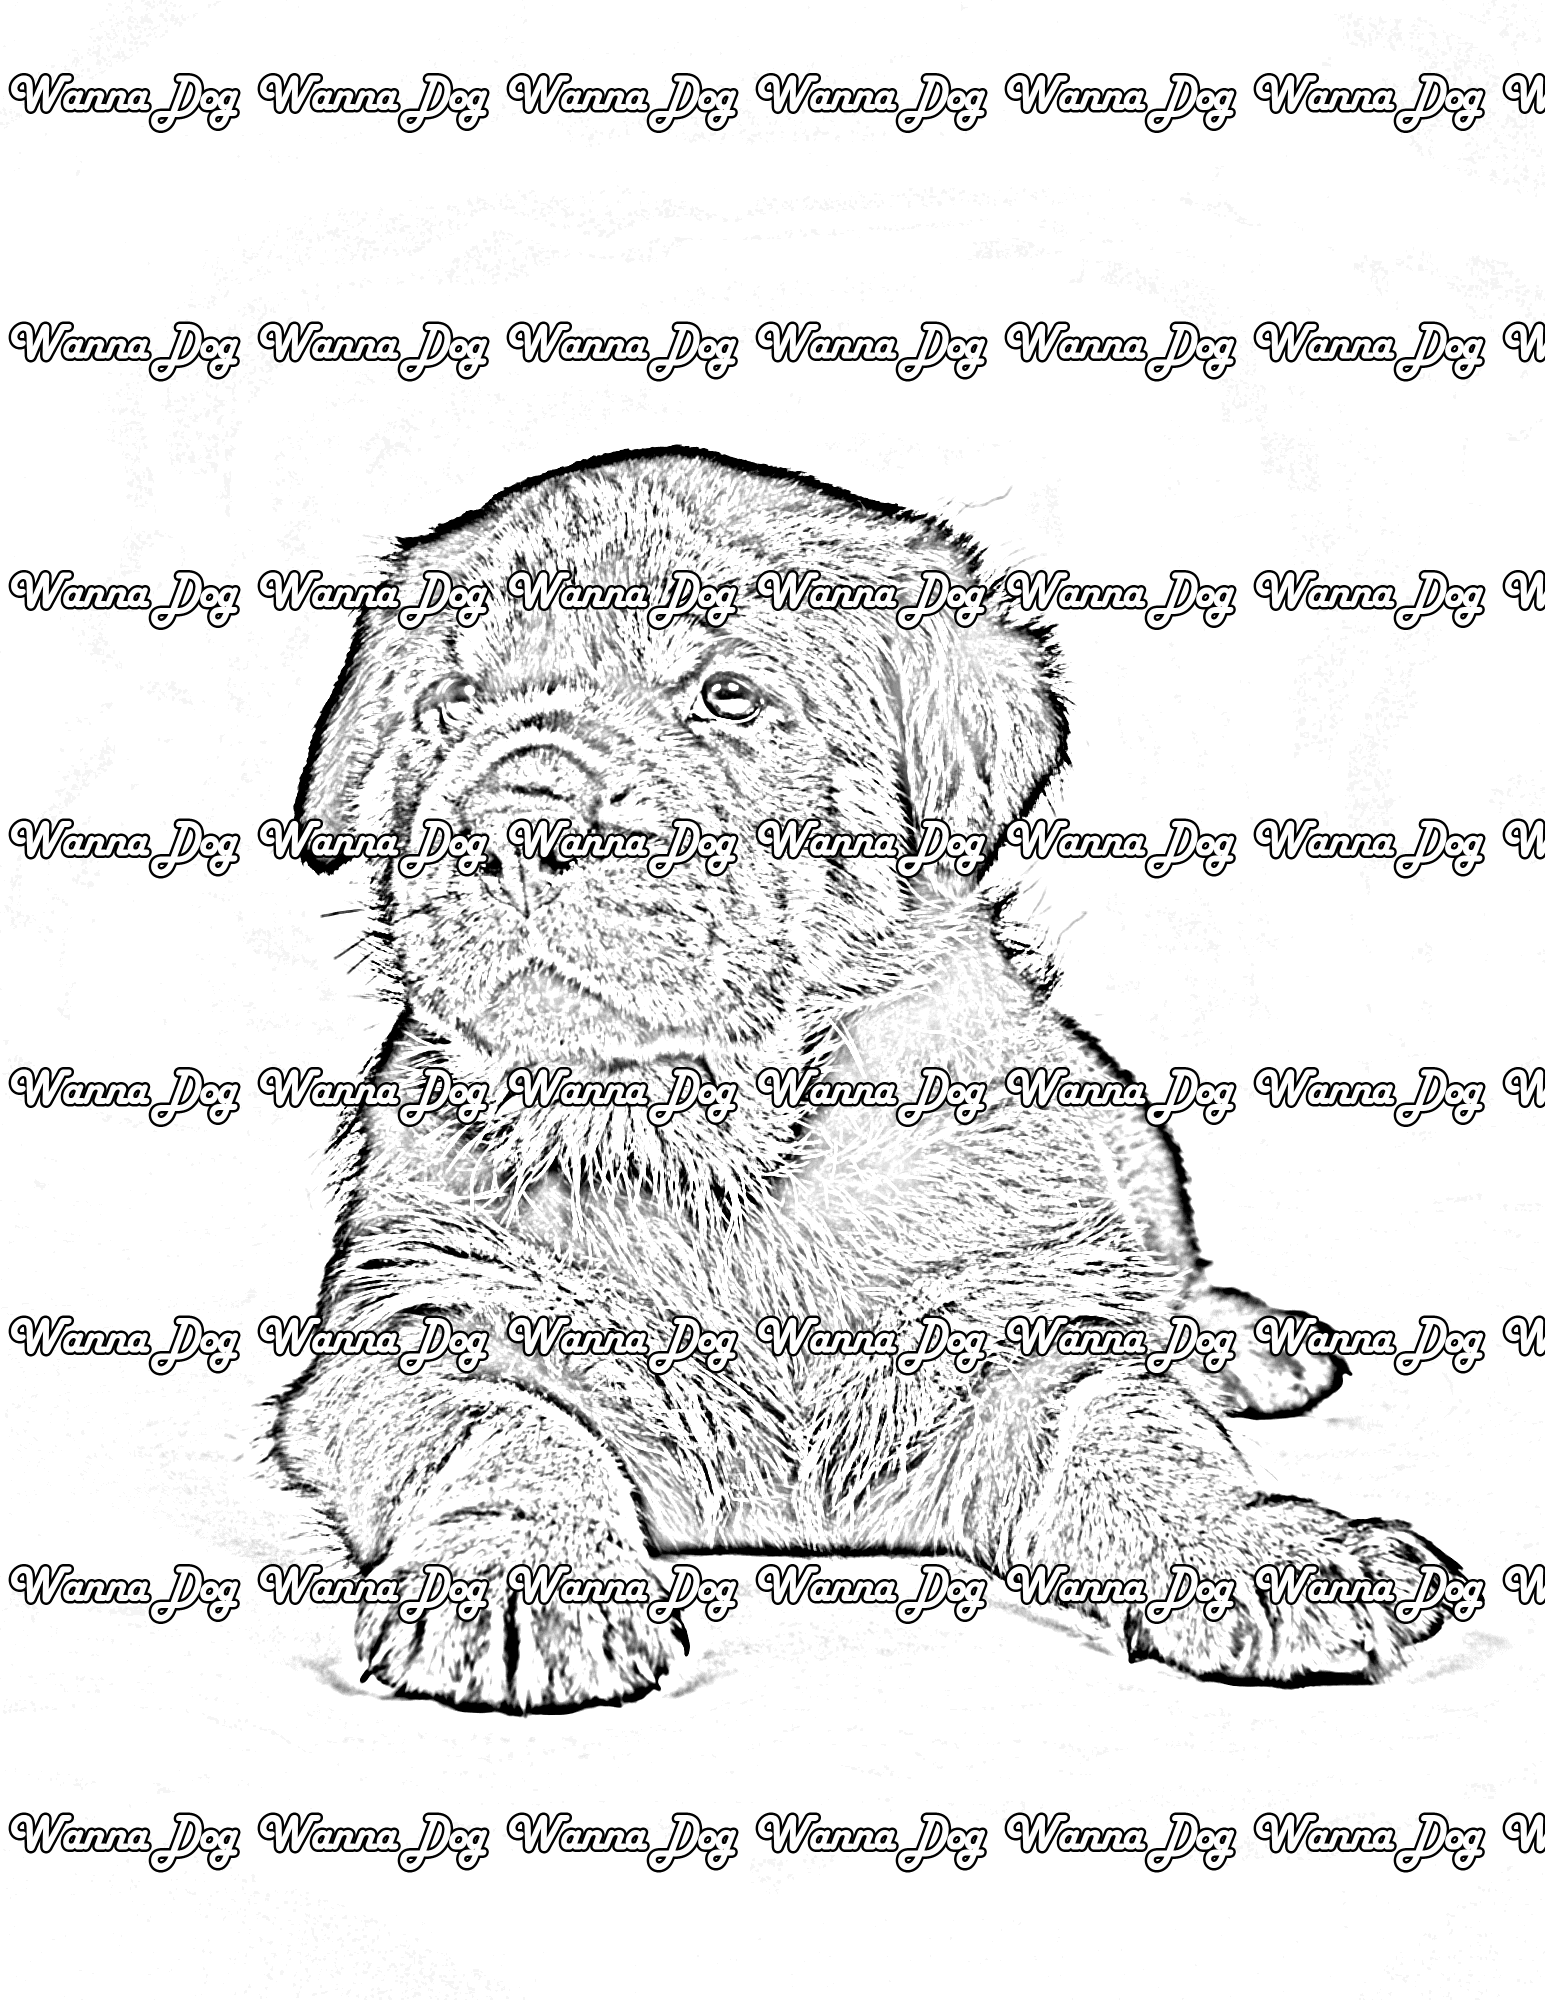 Rottweiler Puppy Coloring Page of a Rottweiler Puppy sitting down